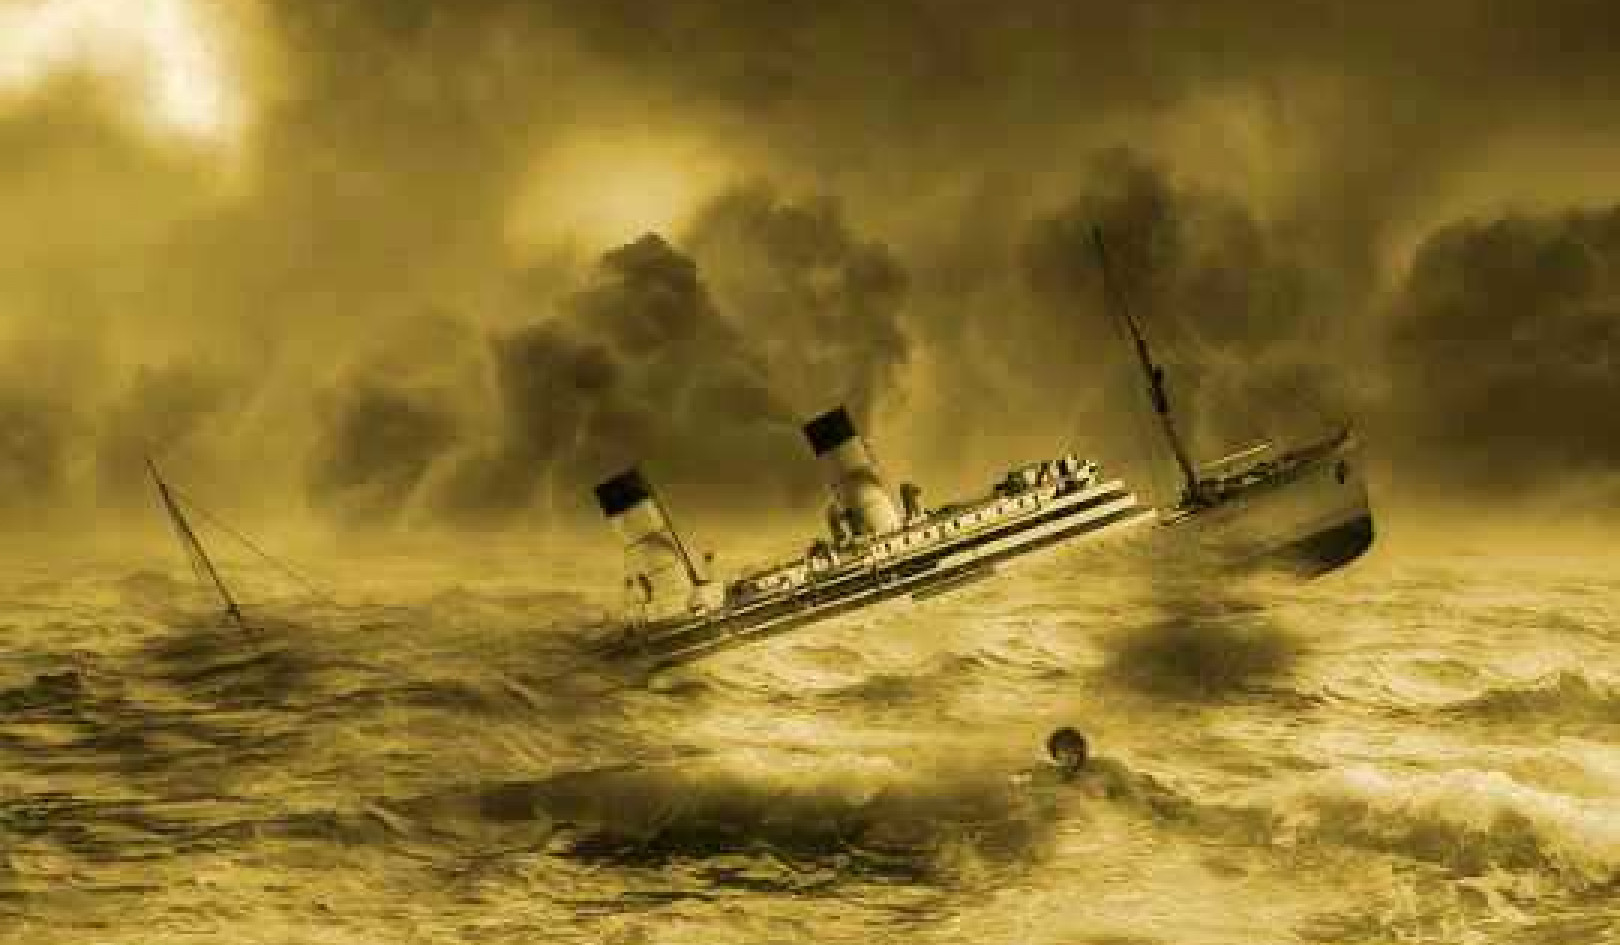 The Titanic Offers Timeless Lessons About Survival In Any Situation